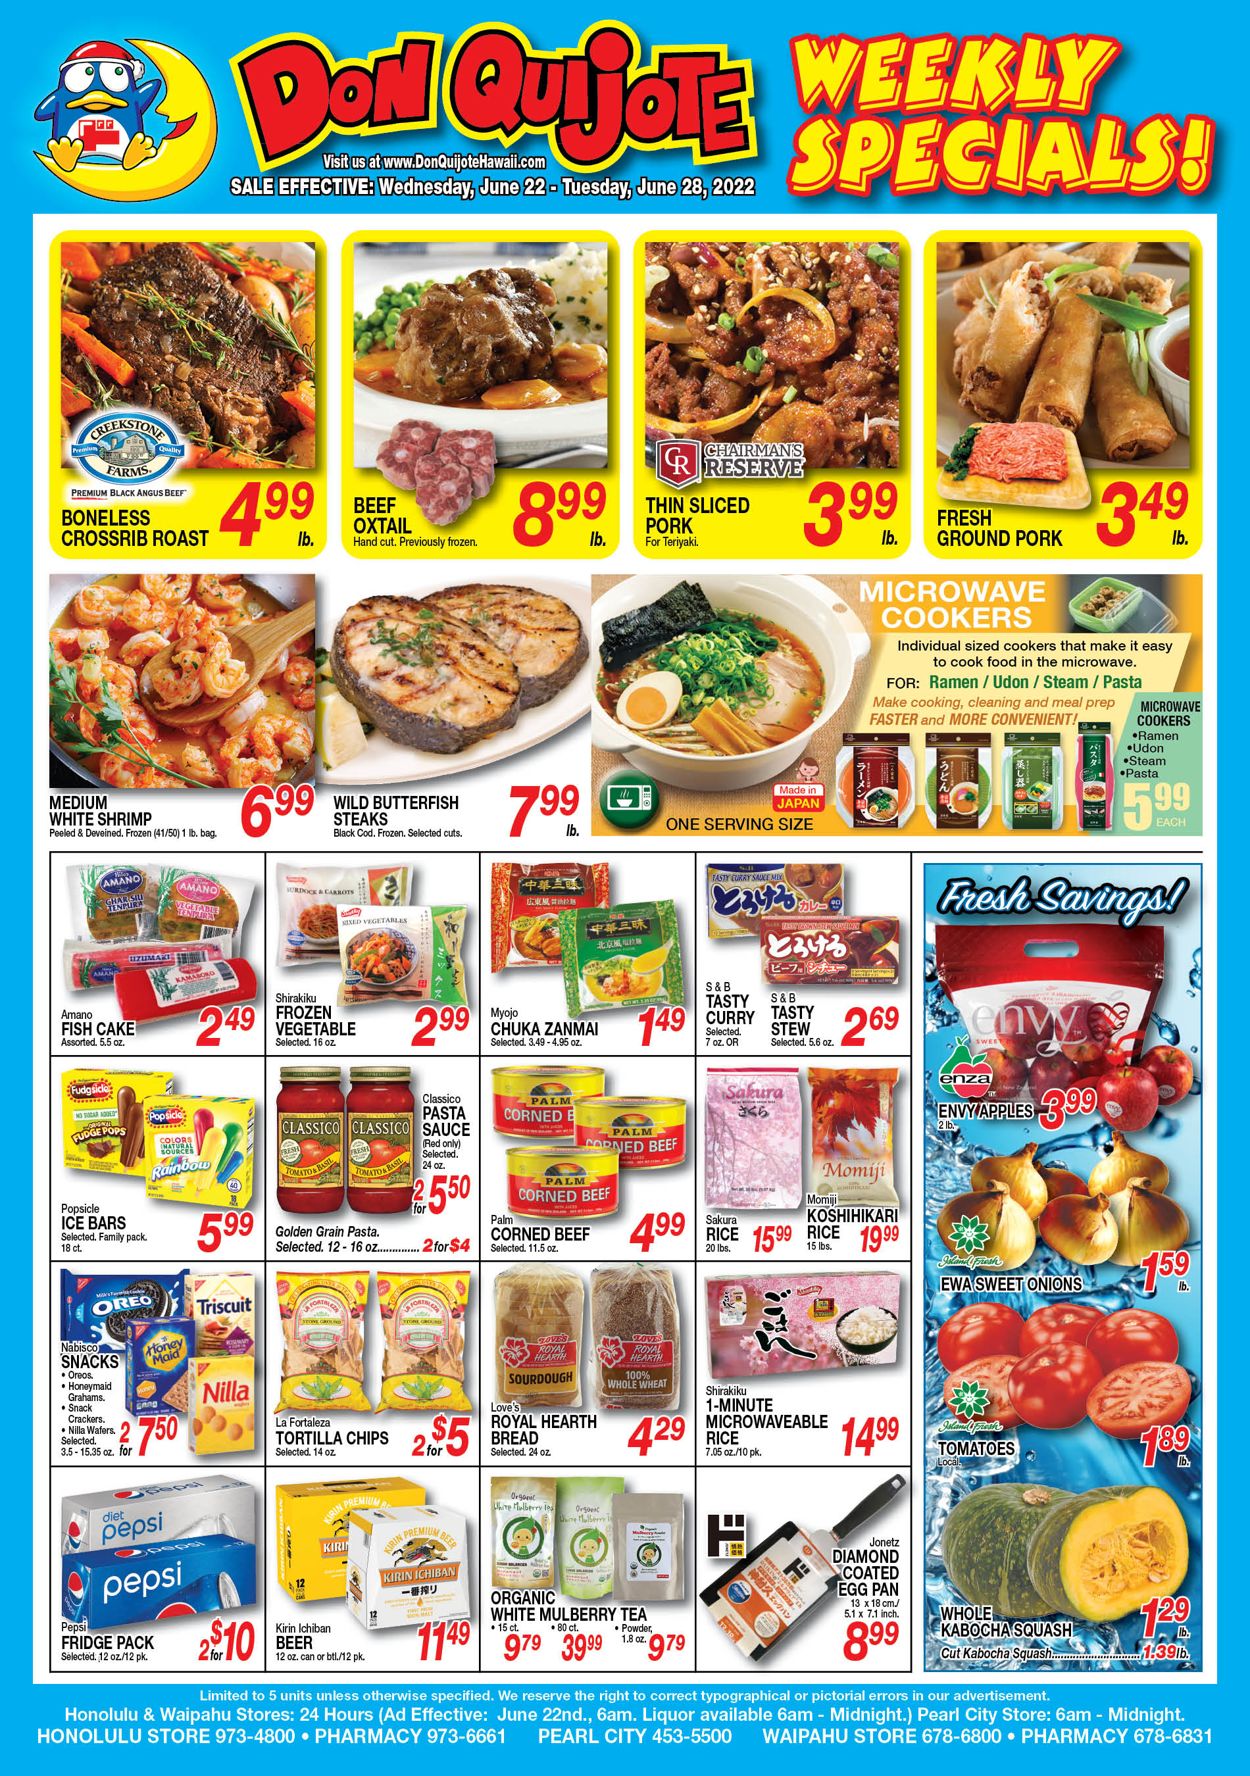 Catalogue Don Quijote Hawaii from 06/22/2022